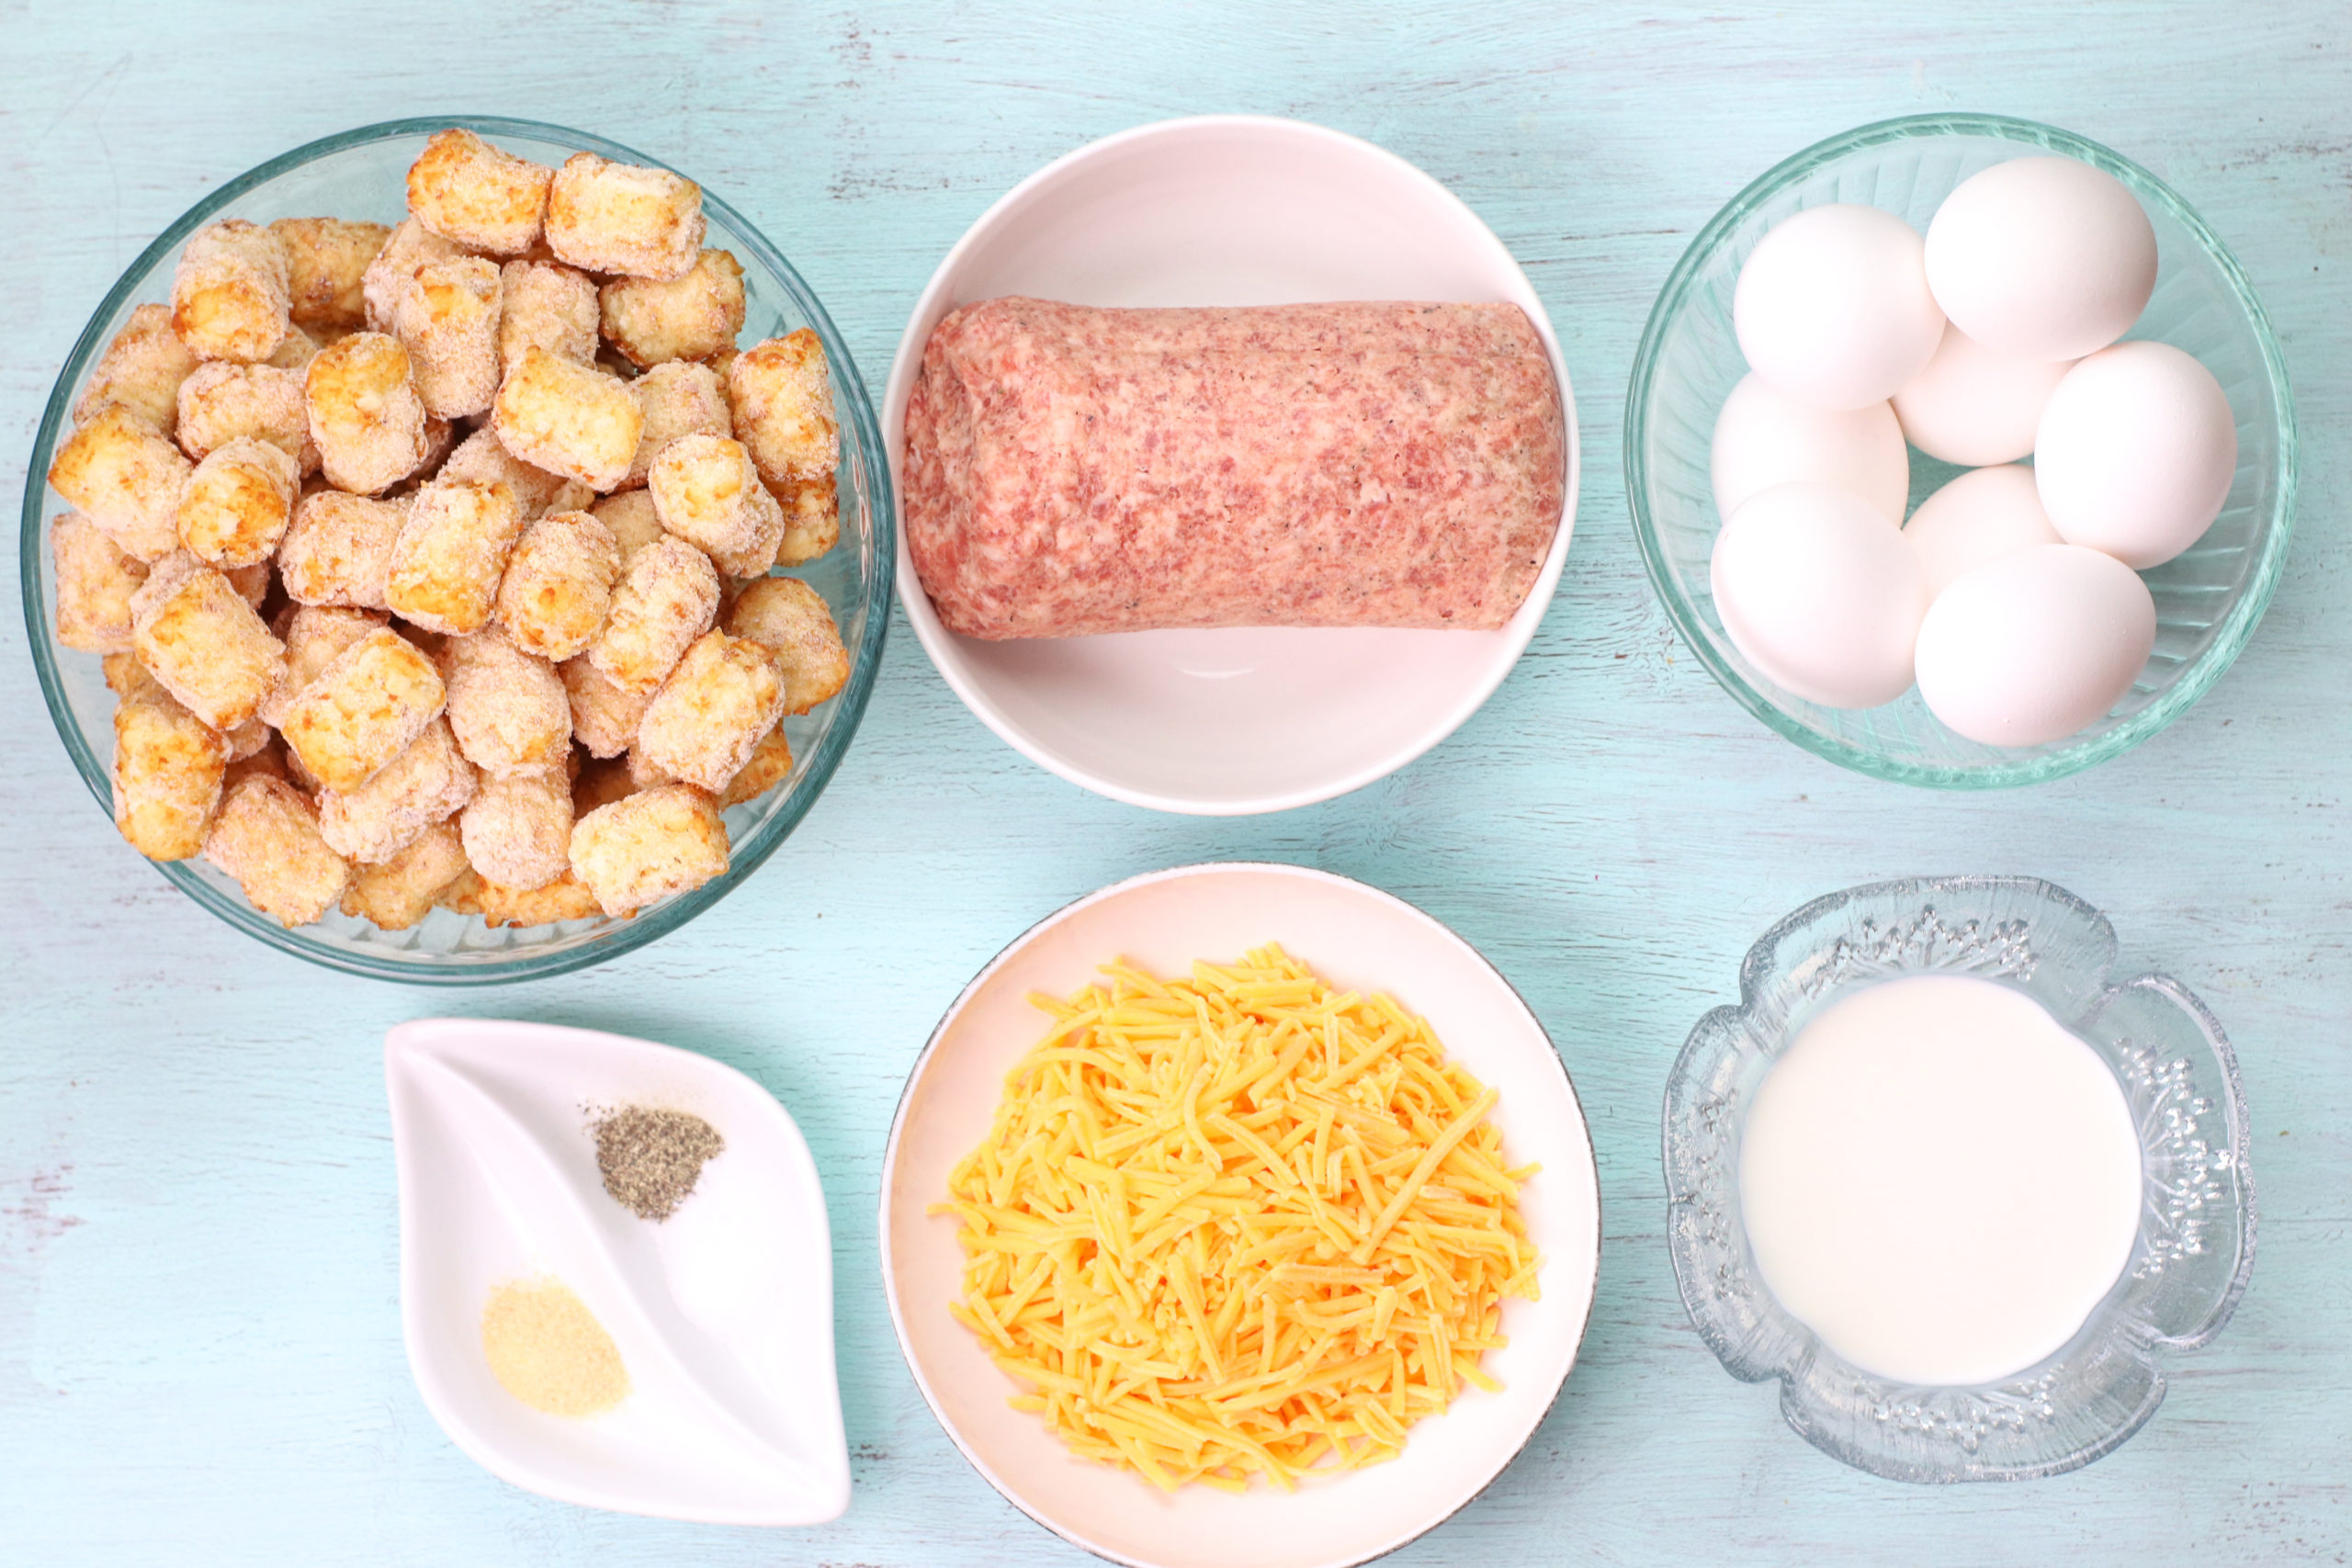 ingredients for making tater tot casserole without soup